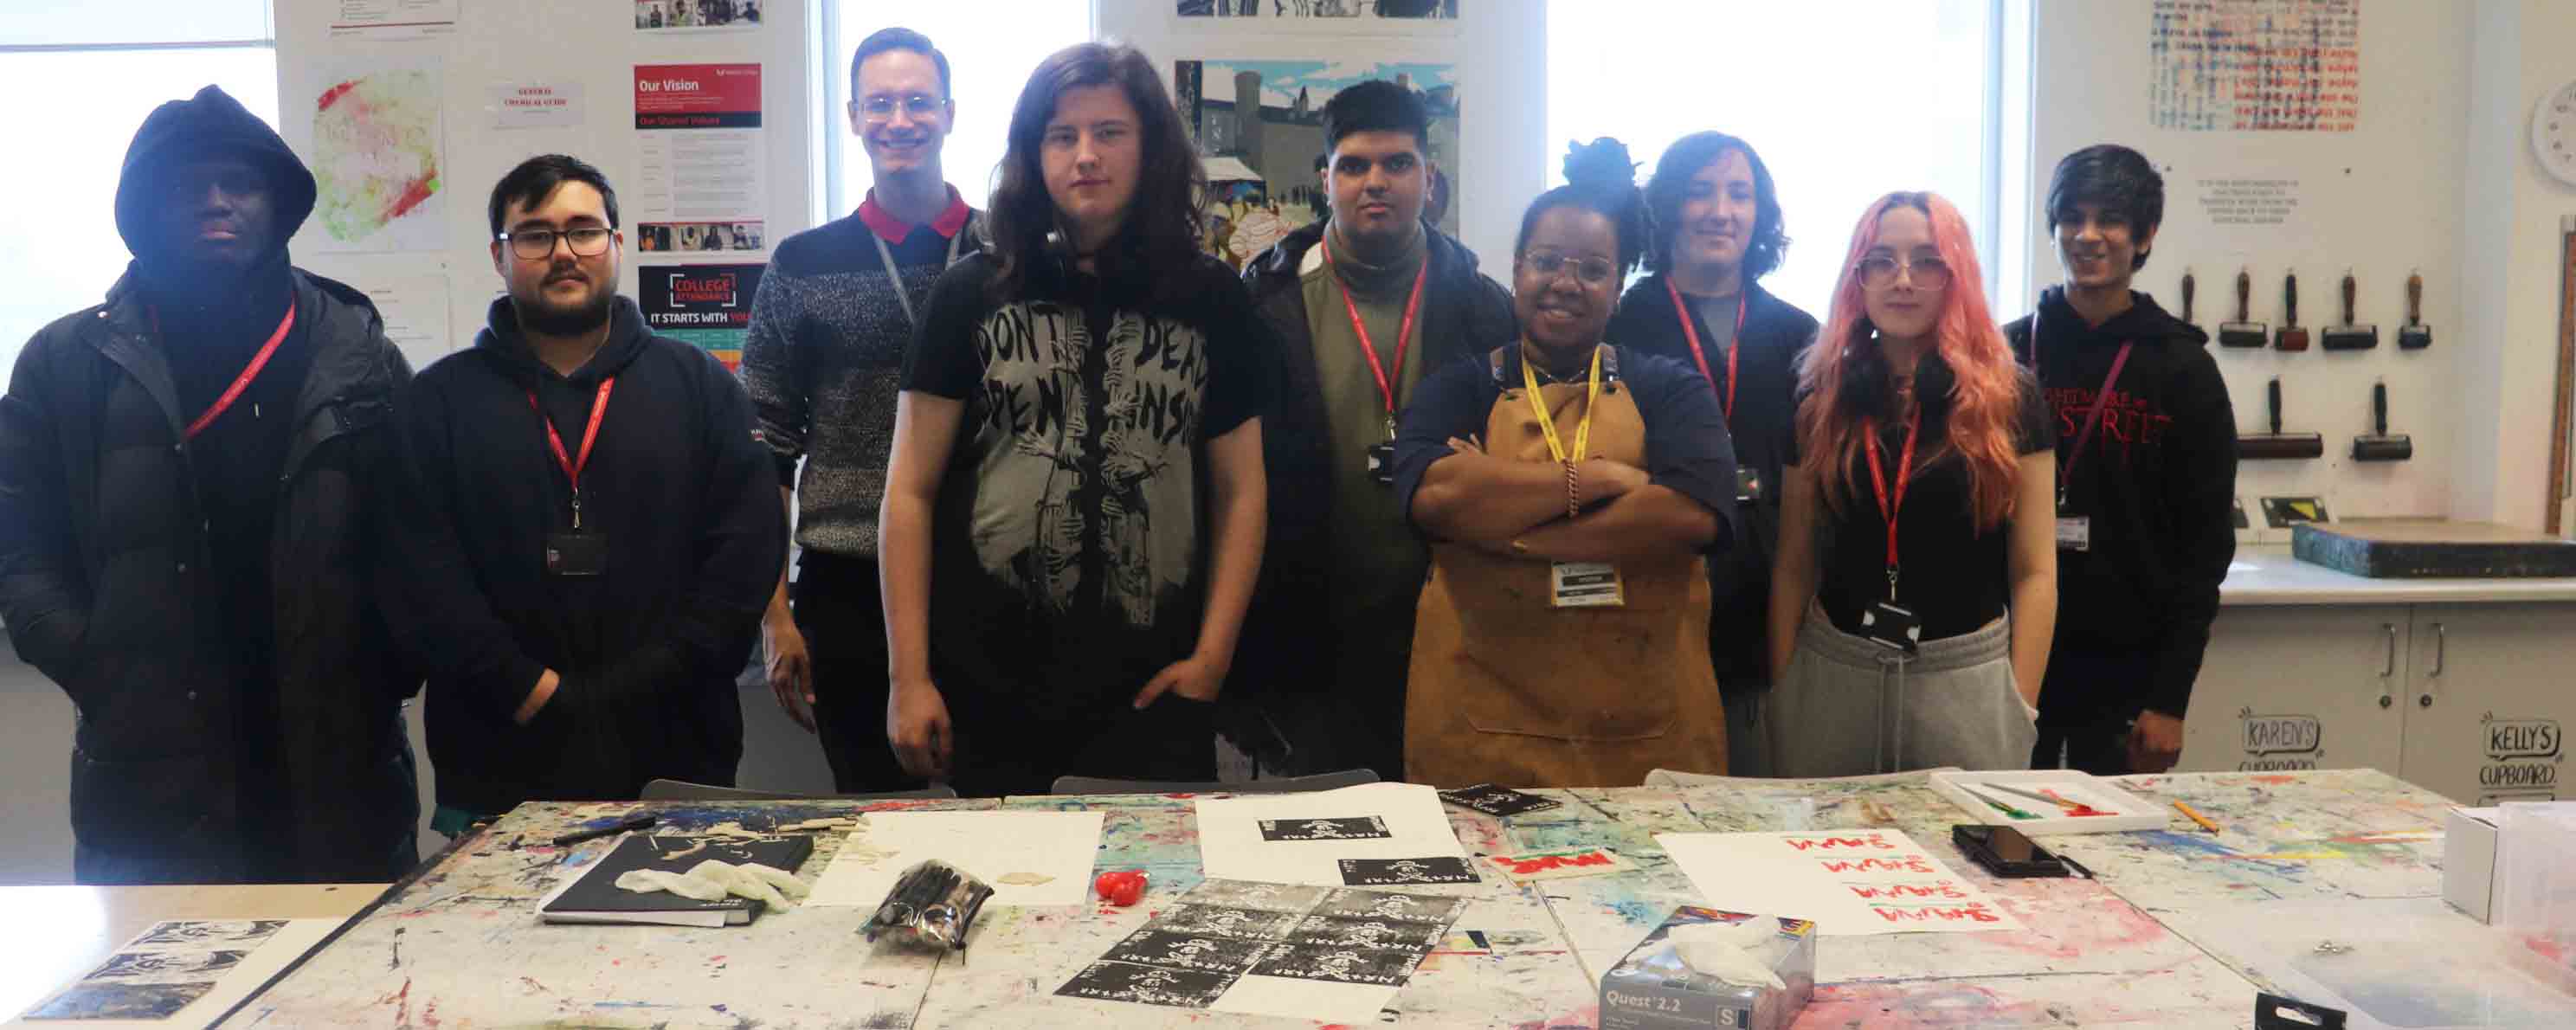 group shot of art students and artist in workshop